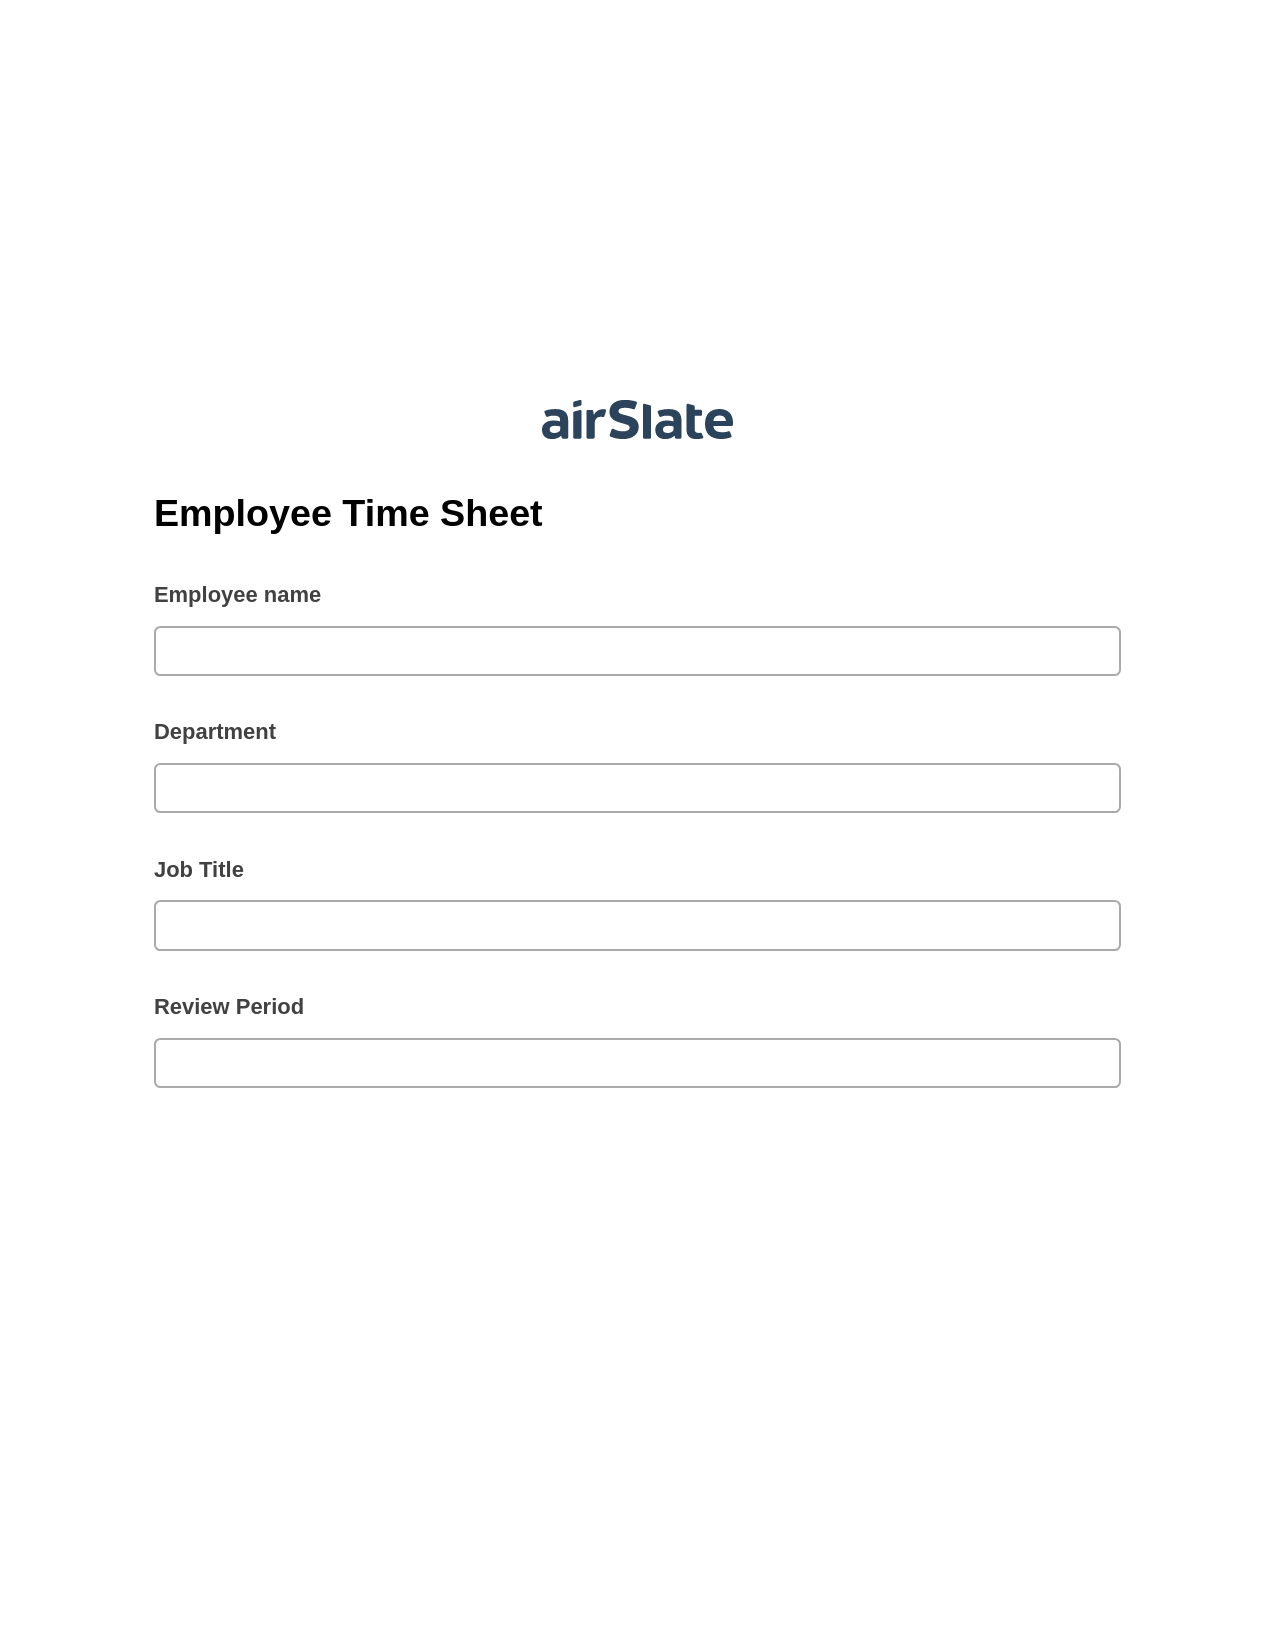 Multirole Employee Time Sheet Pre-fill from CSV File Bot, Create slate addon, Archive to Dropbox Bot